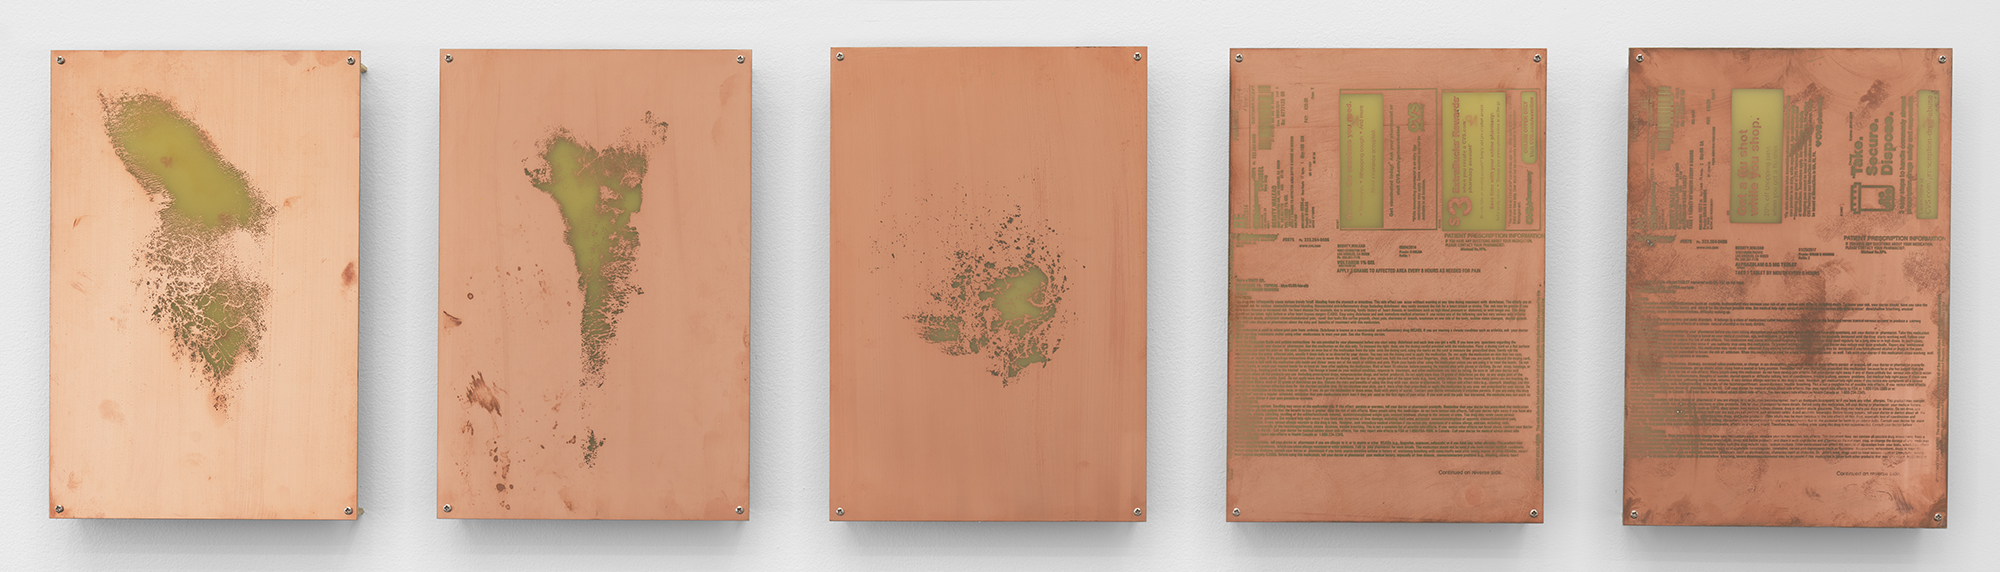   Body Print (Right Clavicle and Attending Soft Tissues, Left Carpal and Attending Soft Tissues, Right Pectoral, Voltaren 1% Gel, Alprazolam 0.5 mg Tablet)    2017   Etched copper-clad FR-4 glass-reinforced epoxy laminate board  12 x 8 inches each, 5